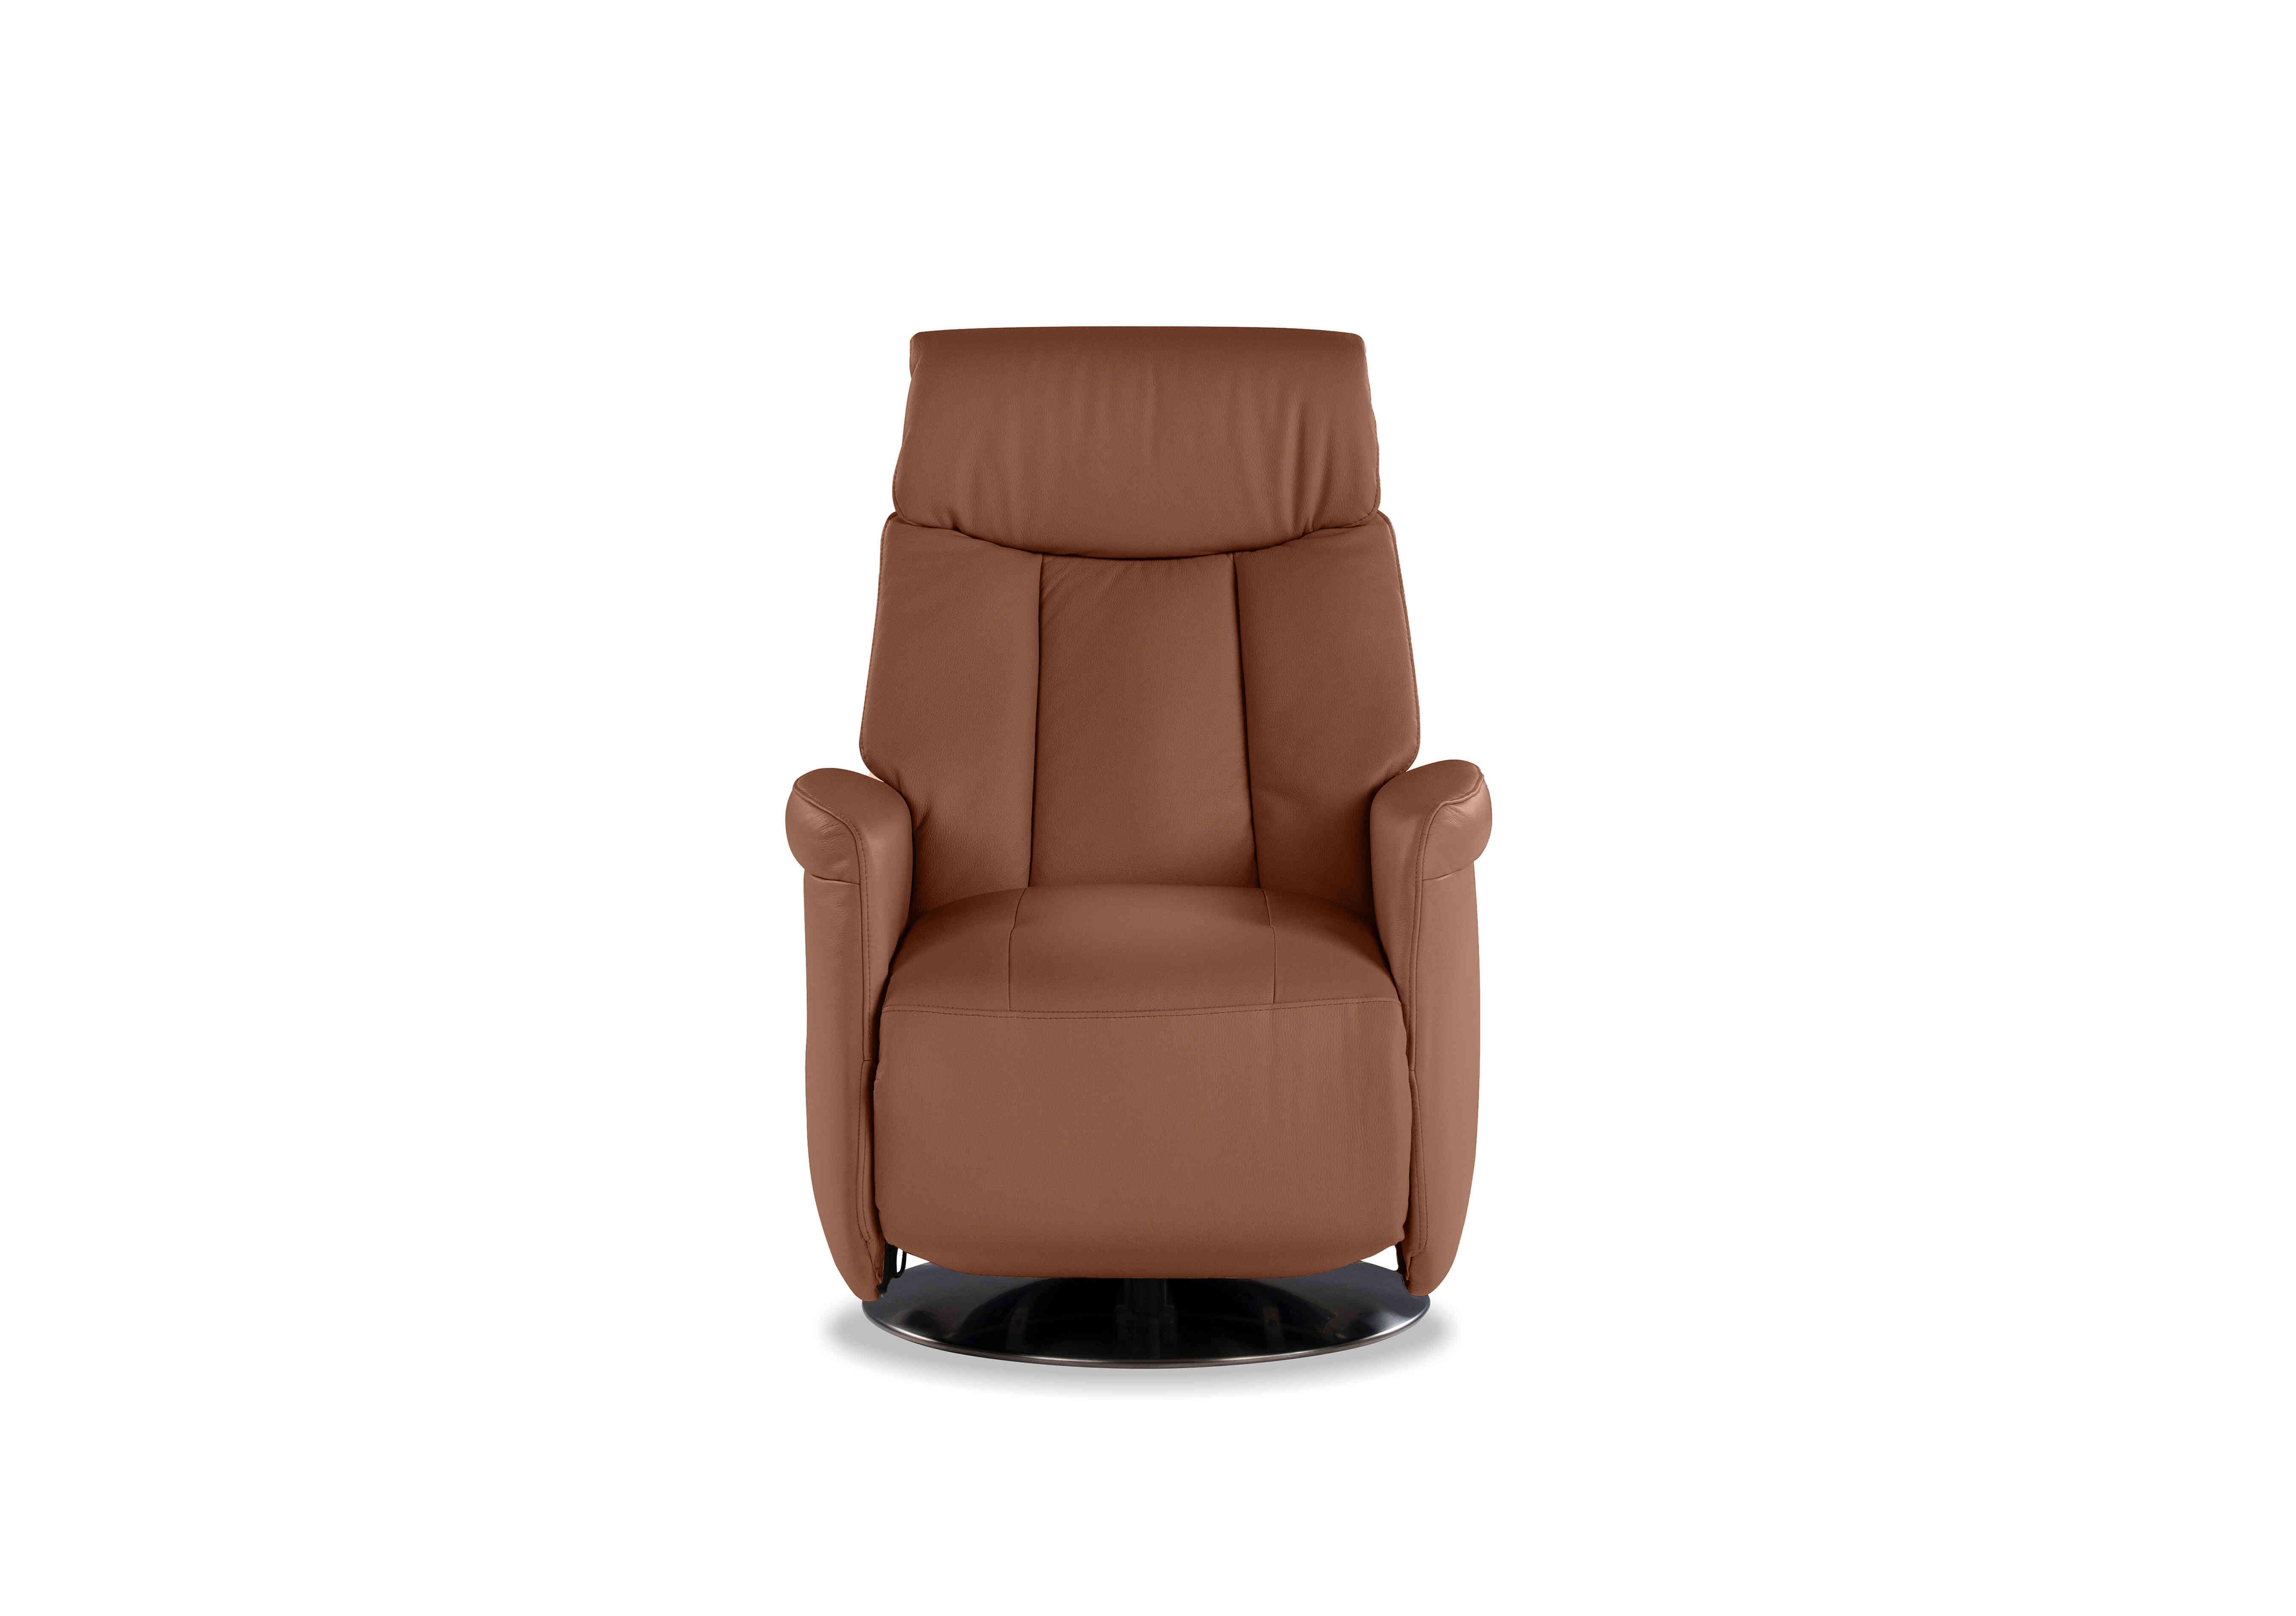 Tricolour Carlo Leather Swivel Power Recliner Chair in Torello 363 Cognac An Ft on Furniture Village